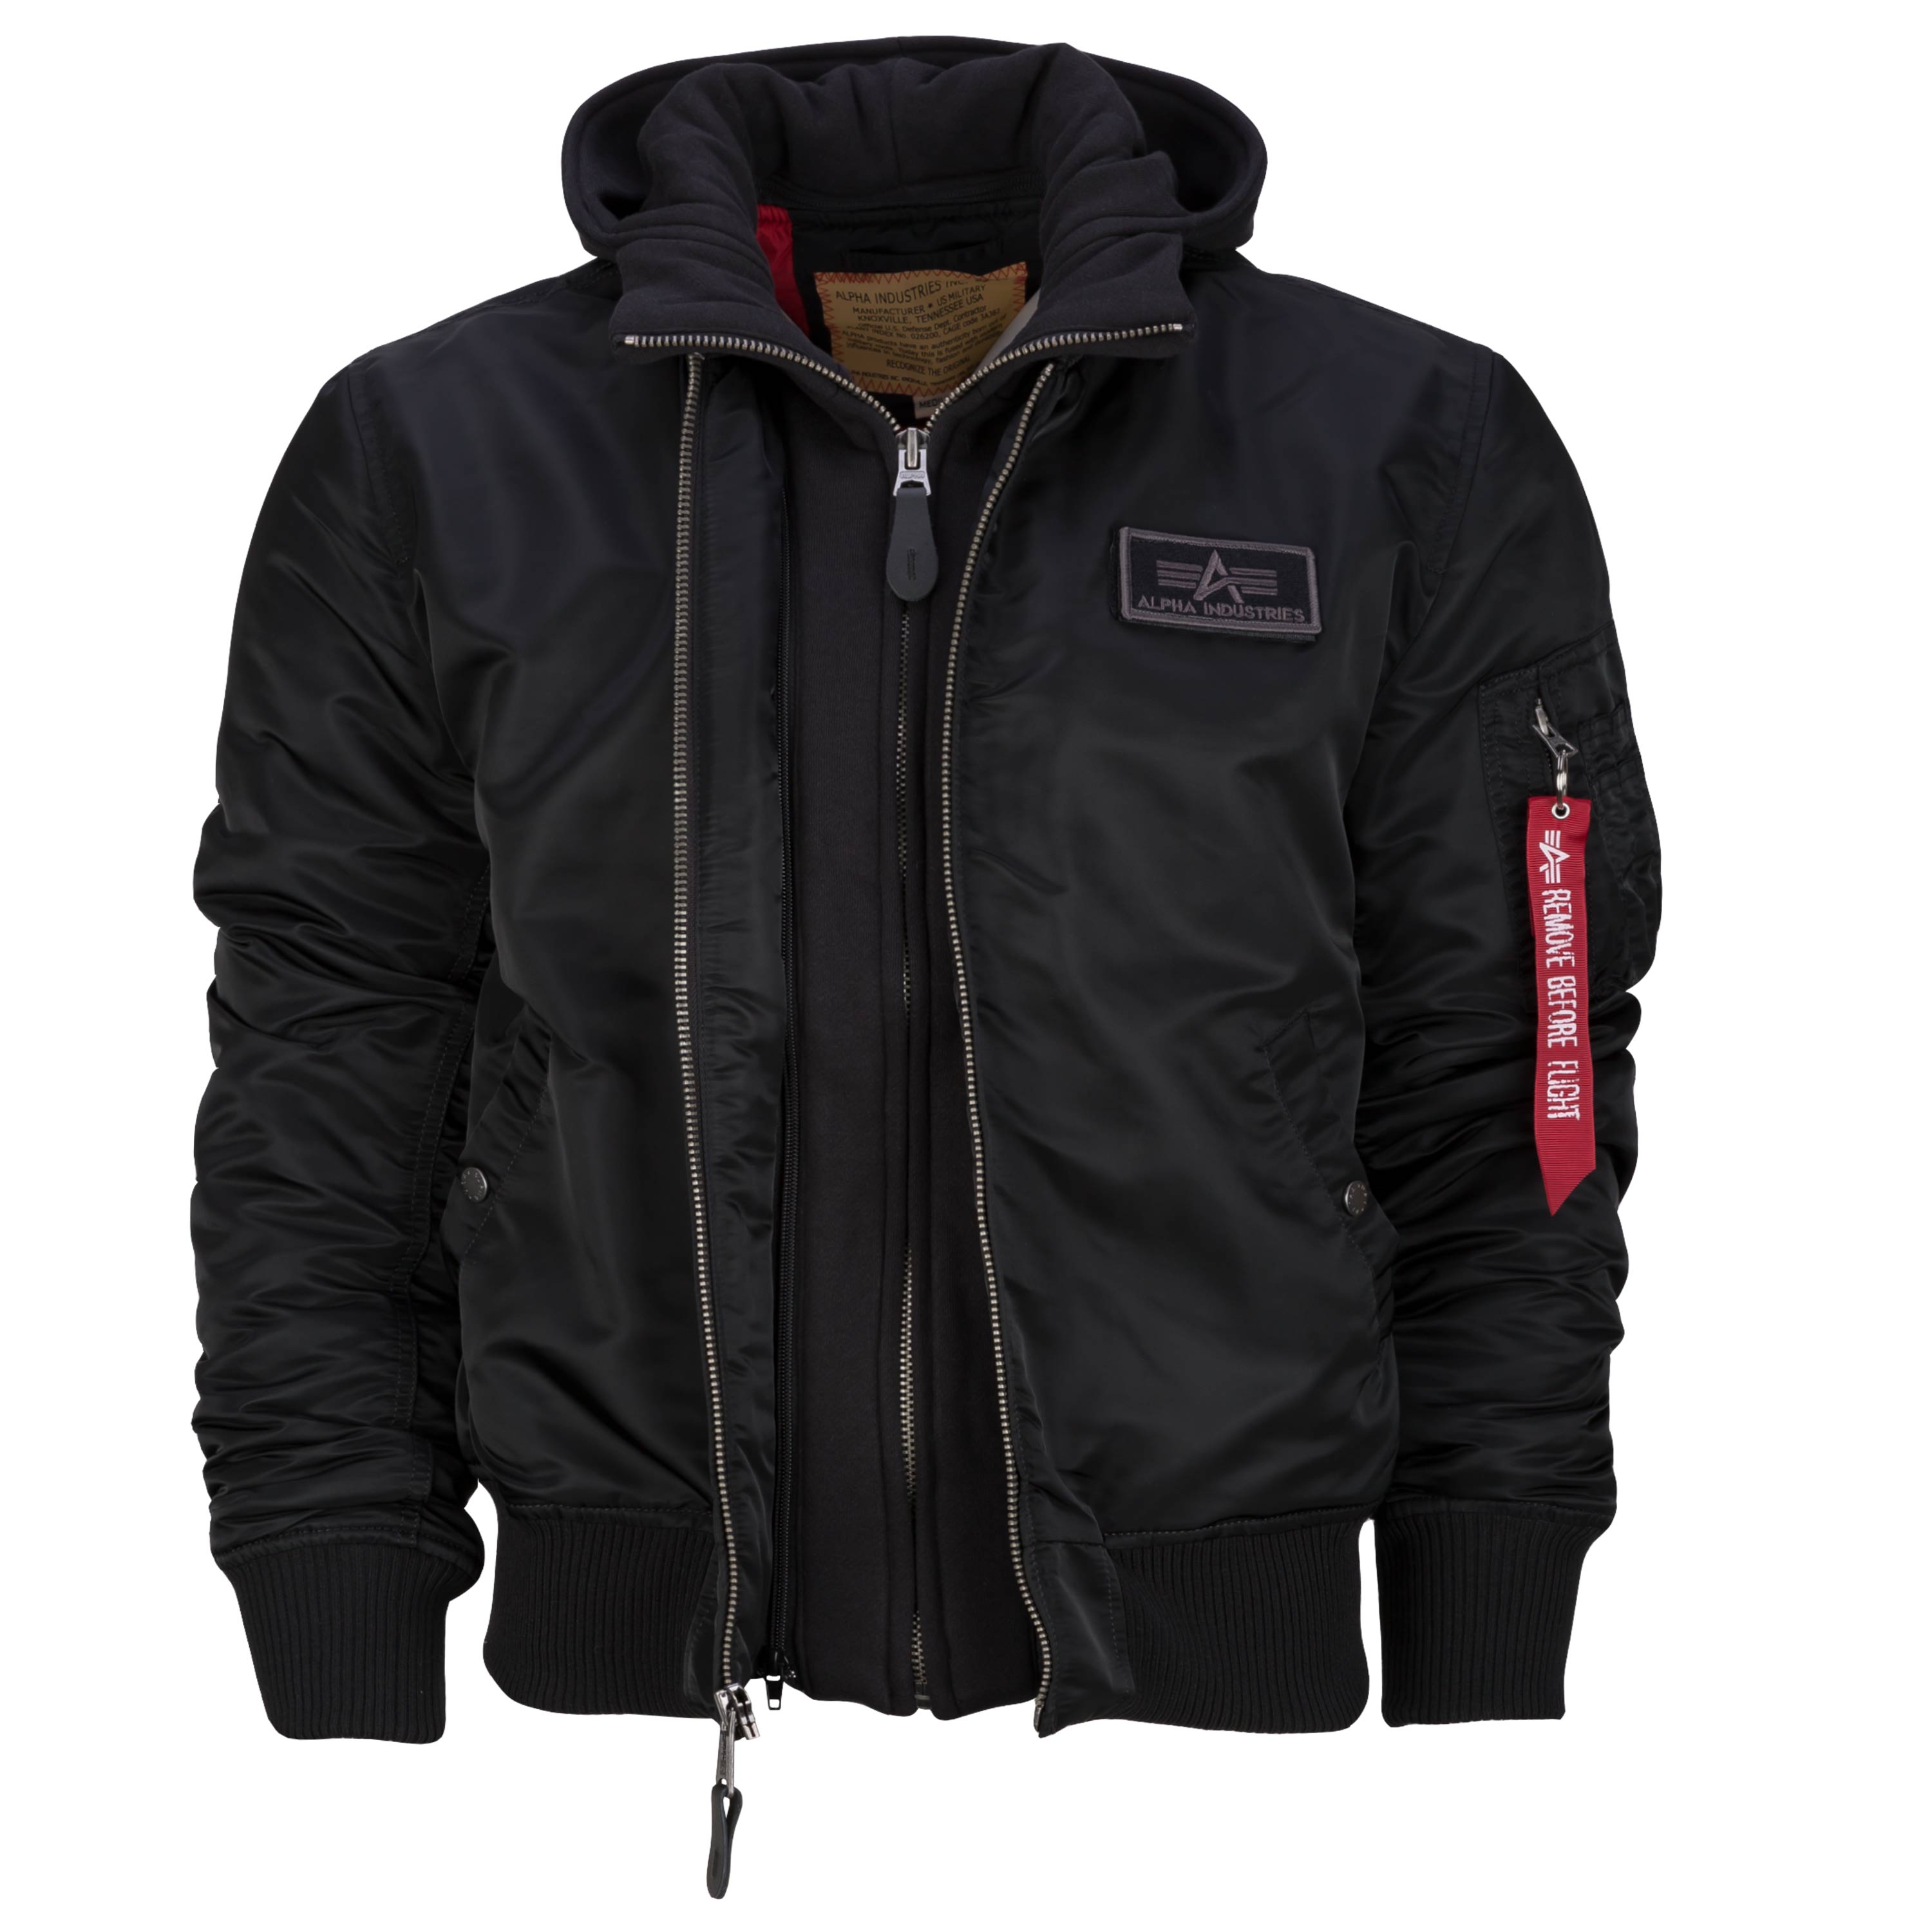 Purchase the black Alpha ASMC Industries II MA-1 by D-Tec Jacket